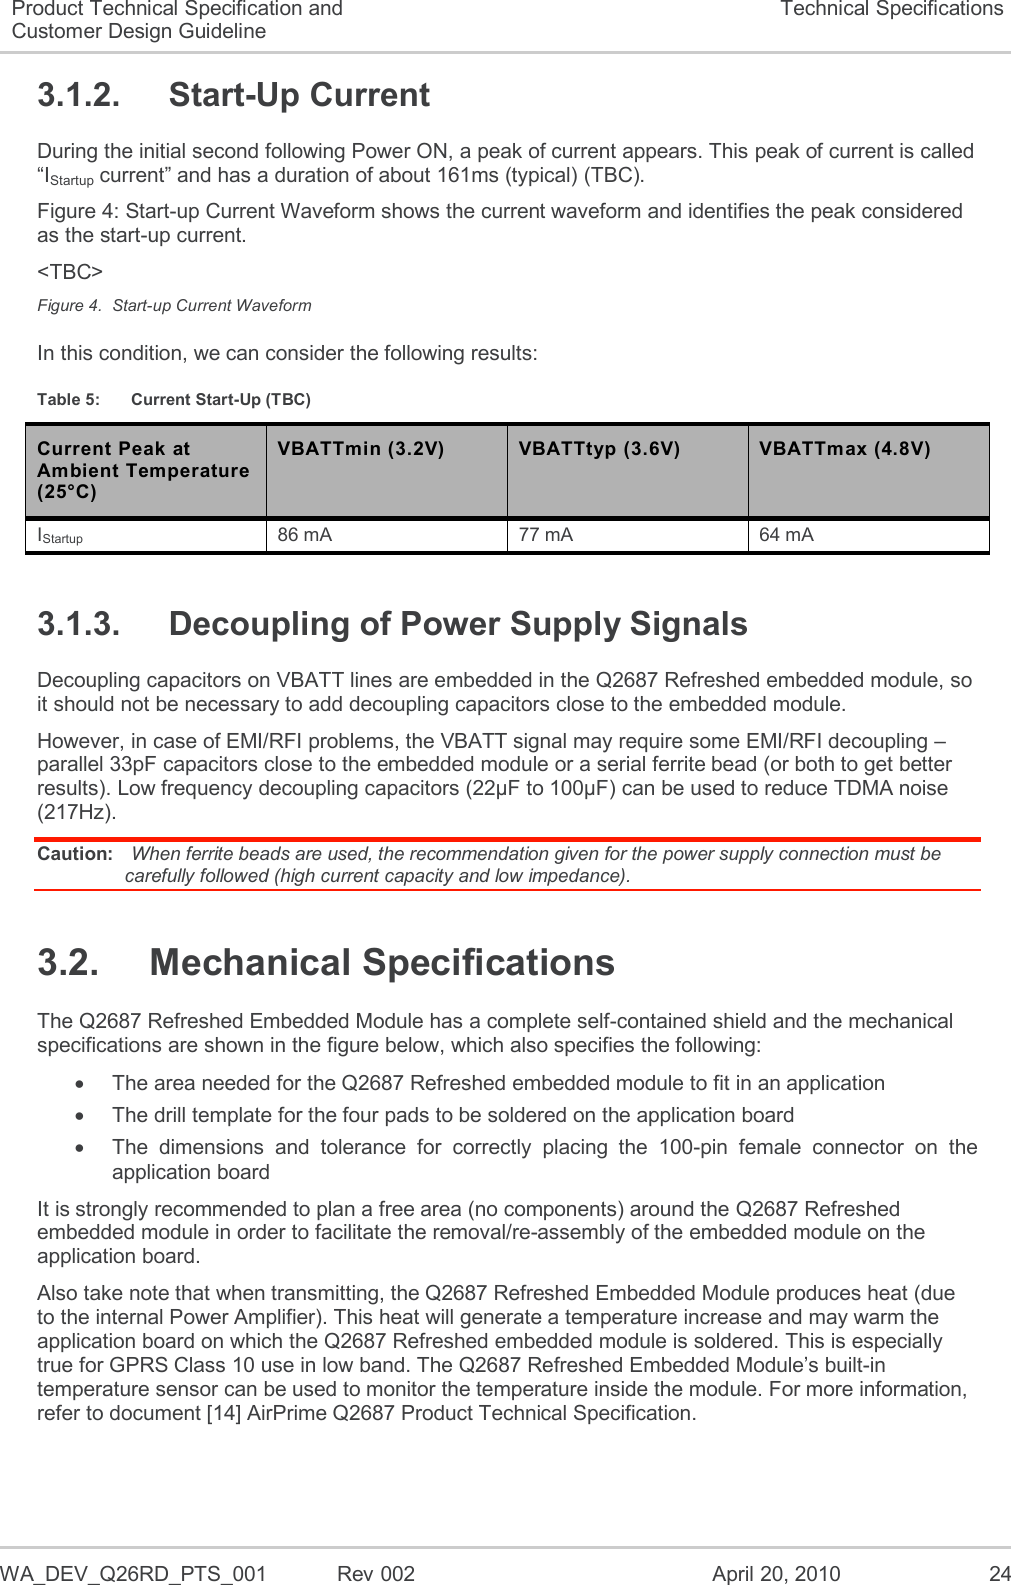  WA_DEV_Q26RD_PTS_001  Rev 002  April 20, 2010 24 Product Technical Specification and Customer Design Guideline Technical Specifications 3.1.2.  Start-Up Current During the initial second following Power ON, a peak of current appears. This peak of current is called “IStartup current” and has a duration of about 161ms (typical) (TBC). Figure 4: Start-up Current Waveform shows the current waveform and identifies the peak considered as the start-up current. &lt;TBC&gt; Figure 4.  Start-up Current Waveform In this condition, we can consider the following results: Table 5:  Current Start-Up (TBC) Current Peak at Ambient Temperature (25°C) VBATTmin (3.2V) VBATTtyp (3.6V) VBATTmax (4.8V) IStartup 86 mA 77 mA 64 mA 3.1.3.  Decoupling of Power Supply Signals Decoupling capacitors on VBATT lines are embedded in the Q2687 Refreshed embedded module, so it should not be necessary to add decoupling capacitors close to the embedded module. However, in case of EMI/RFI problems, the VBATT signal may require some EMI/RFI decoupling – parallel 33pF capacitors close to the embedded module or a serial ferrite bead (or both to get better results). Low frequency decoupling capacitors (22µF to 100µF) can be used to reduce TDMA noise (217Hz). Caution:  When ferrite beads are used, the recommendation given for the power supply connection must be carefully followed (high current capacity and low impedance). 3.2.  Mechanical Specifications The Q2687 Refreshed Embedded Module has a complete self-contained shield and the mechanical specifications are shown in the figure below, which also specifies the following:   The area needed for the Q2687 Refreshed embedded module to fit in an application   The drill template for the four pads to be soldered on the application board   The  dimensions  and  tolerance  for  correctly  placing  the  100-pin  female  connector  on  the application board It is strongly recommended to plan a free area (no components) around the Q2687 Refreshed embedded module in order to facilitate the removal/re-assembly of the embedded module on the application board. Also take note that when transmitting, the Q2687 Refreshed Embedded Module produces heat (due to the internal Power Amplifier). This heat will generate a temperature increase and may warm the application board on which the Q2687 Refreshed embedded module is soldered. This is especially true for GPRS Class 10 use in low band. The Q2687 Refreshed Embedded Module’s built-in temperature sensor can be used to monitor the temperature inside the module. For more information, refer to document [14] AirPrime Q2687 Product Technical Specification.  